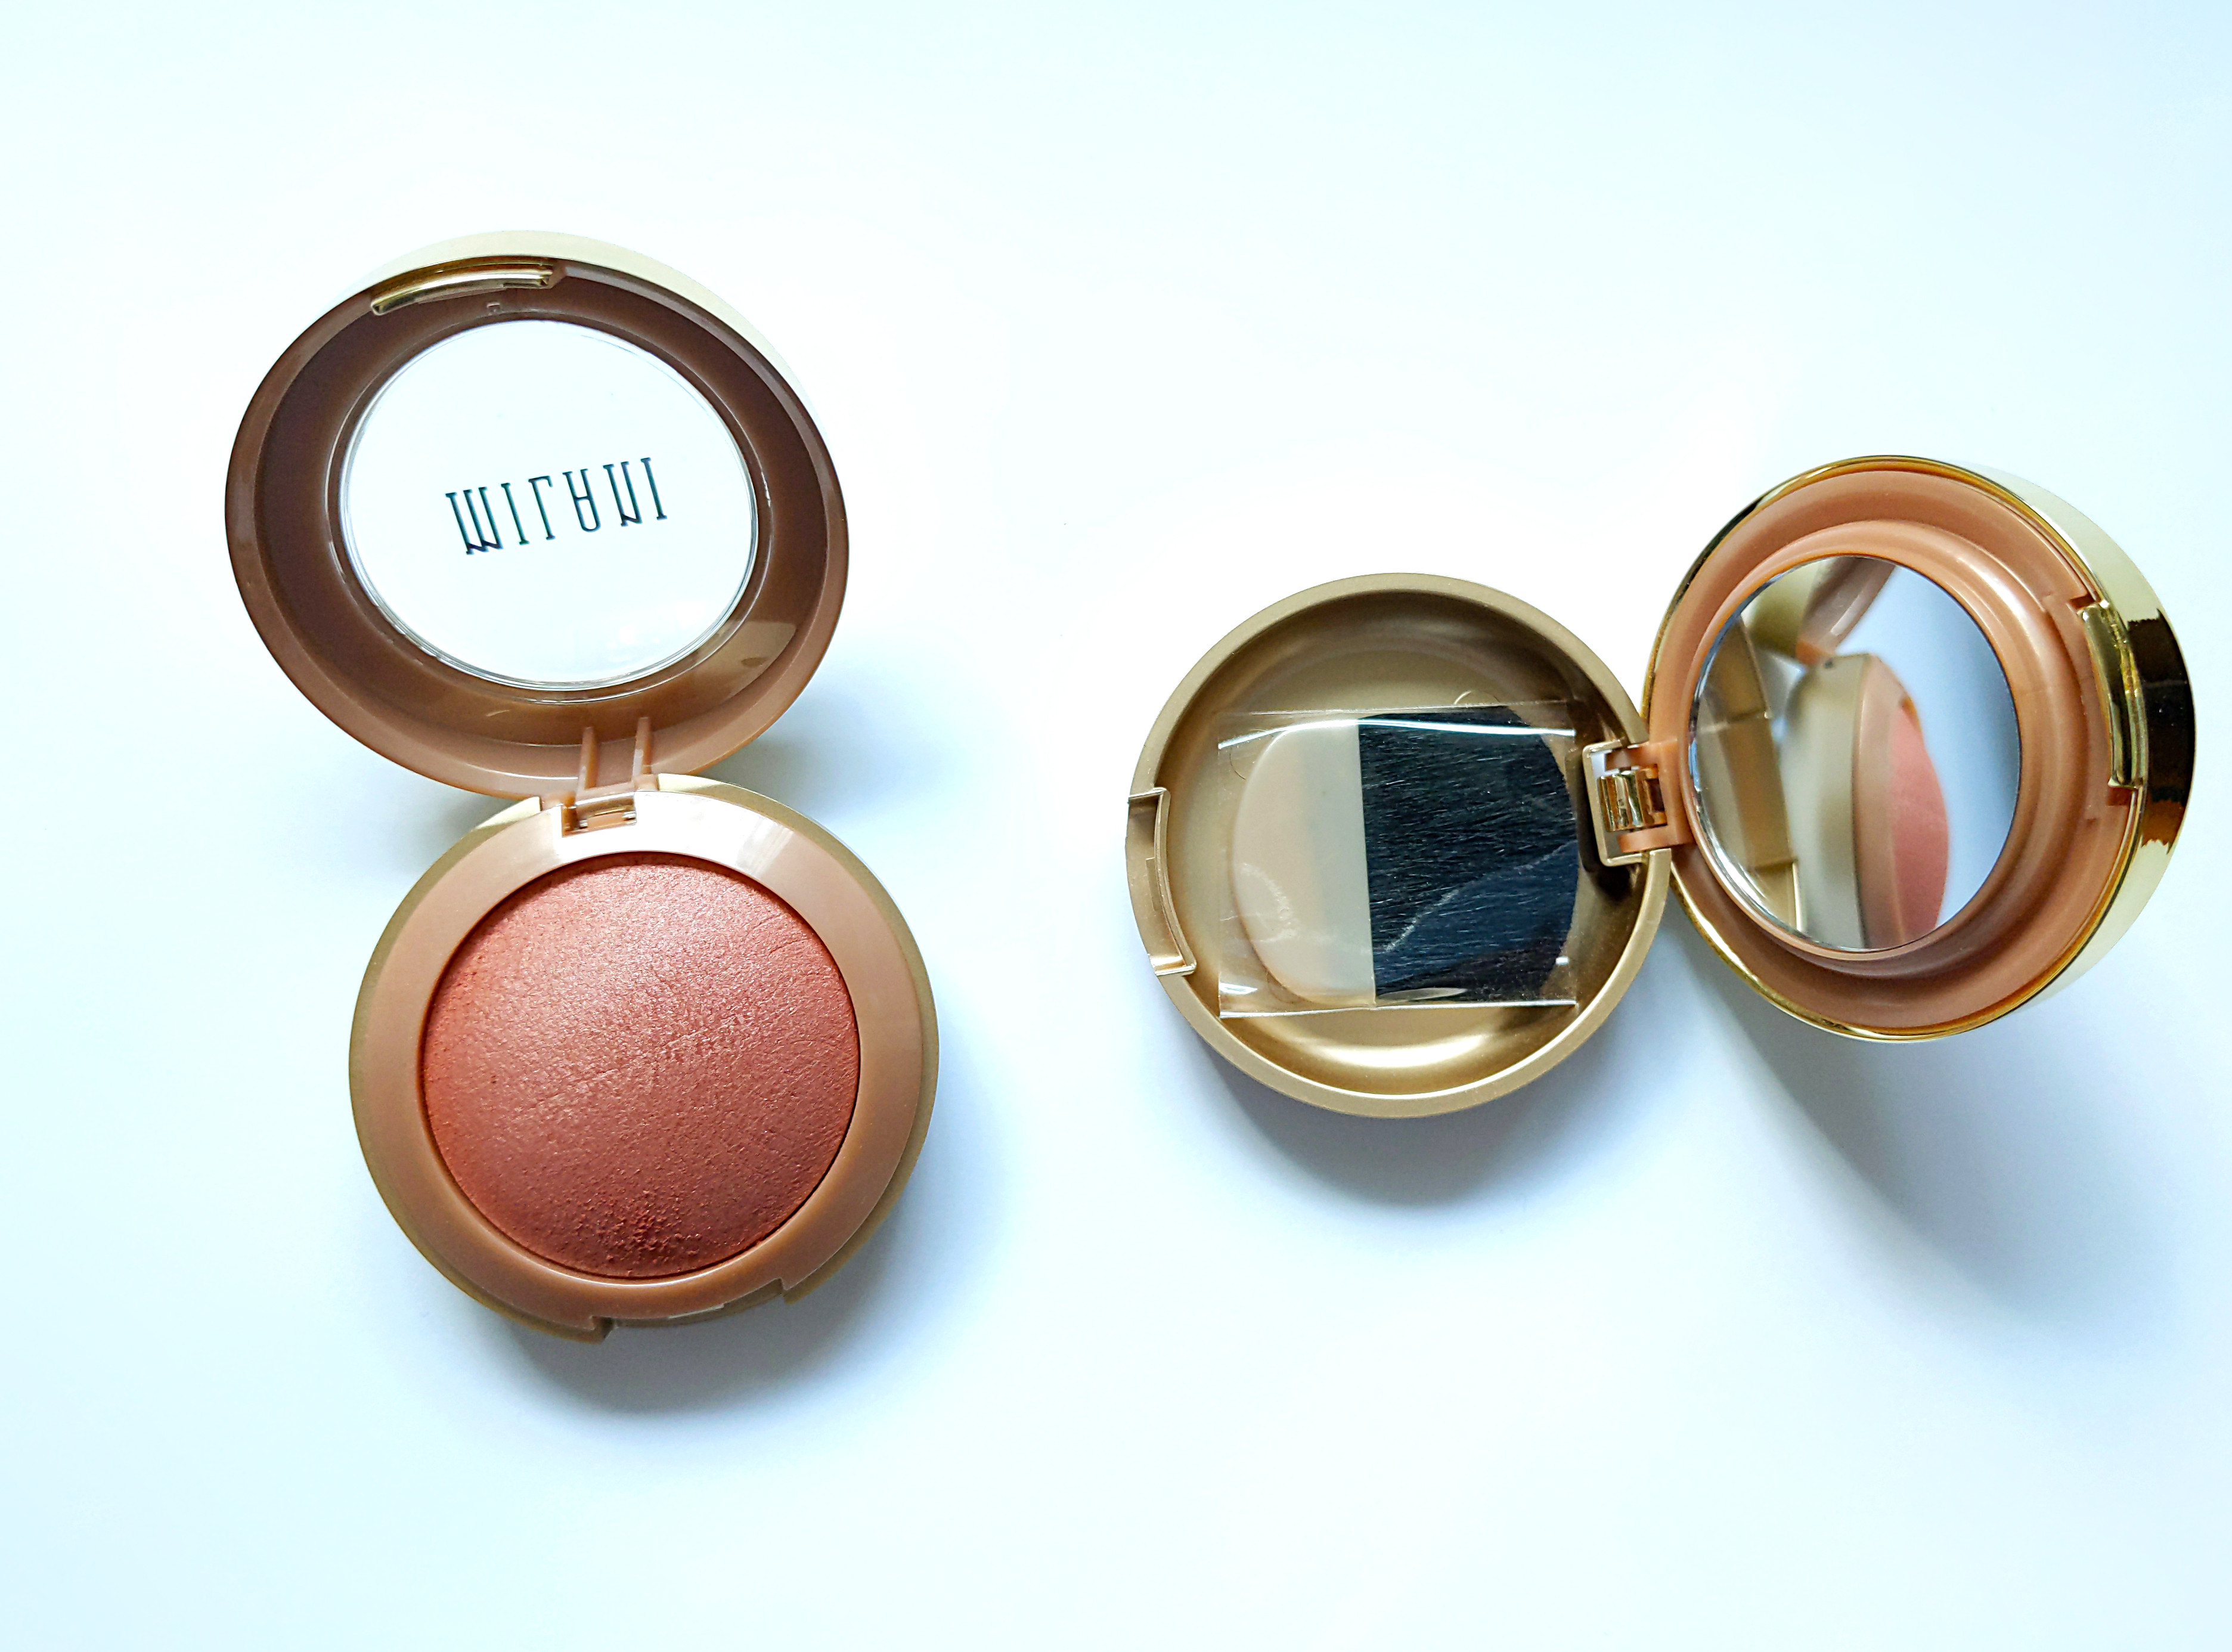 Milani Baked Powder Blushes in 15 Sunset Passione and 05 Luminoso.